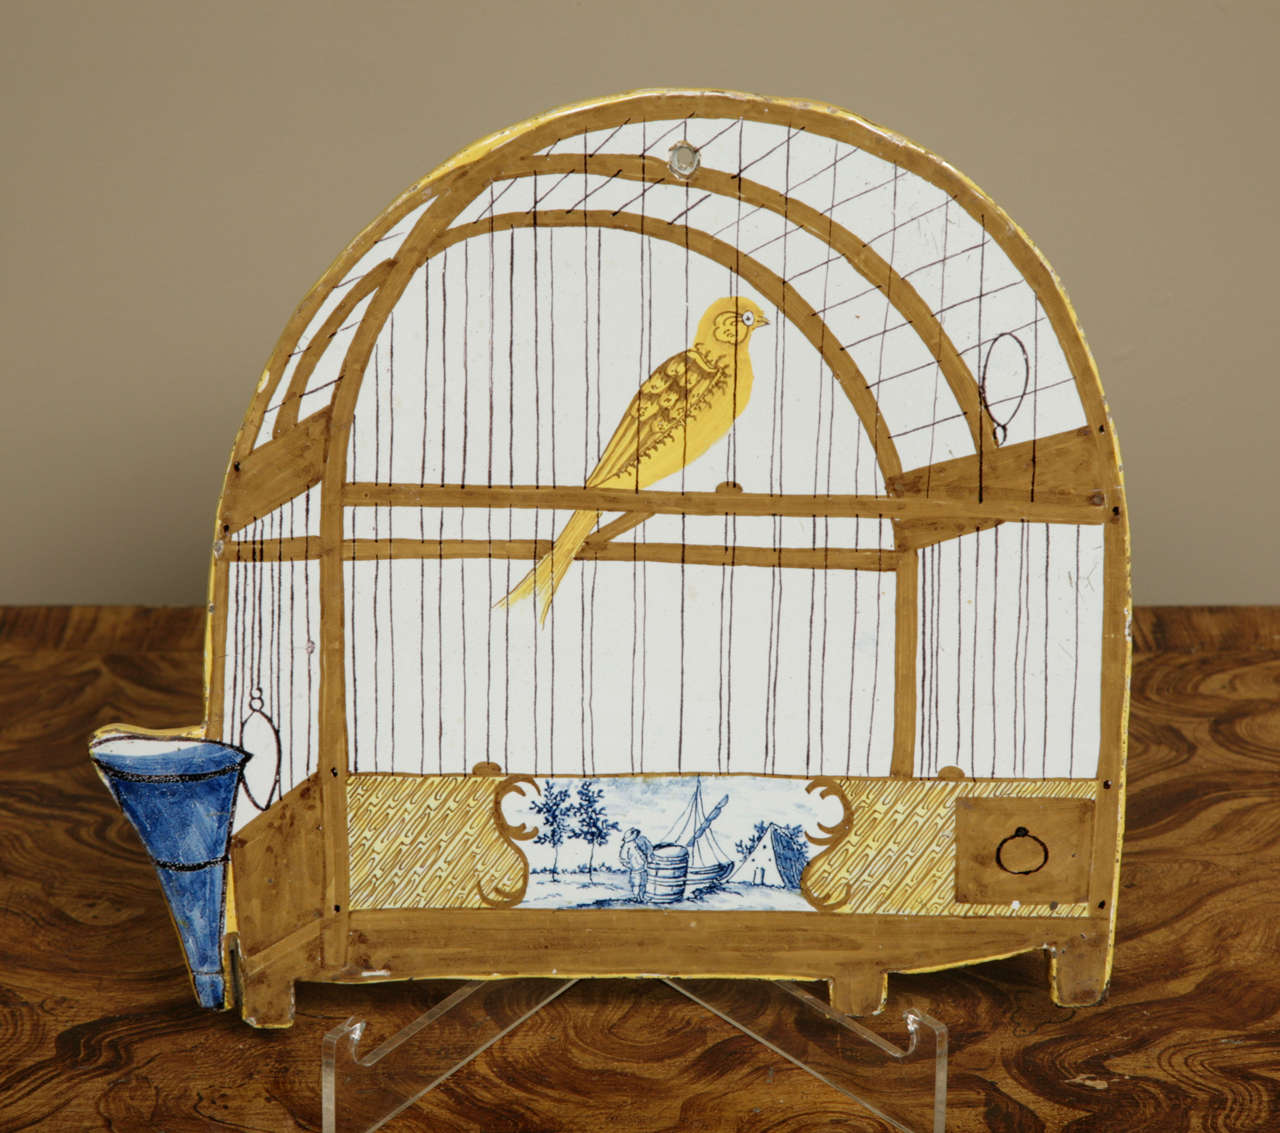 A charming and beautifully decorated and Delft birdcage plaque. Late 18th/early 19th century. (Dutch: Vogelkooiplaque). The arched plaque decorated is in, yellow, brown, black and blue with a perched bird, a water and seed feeder and a little Dutch